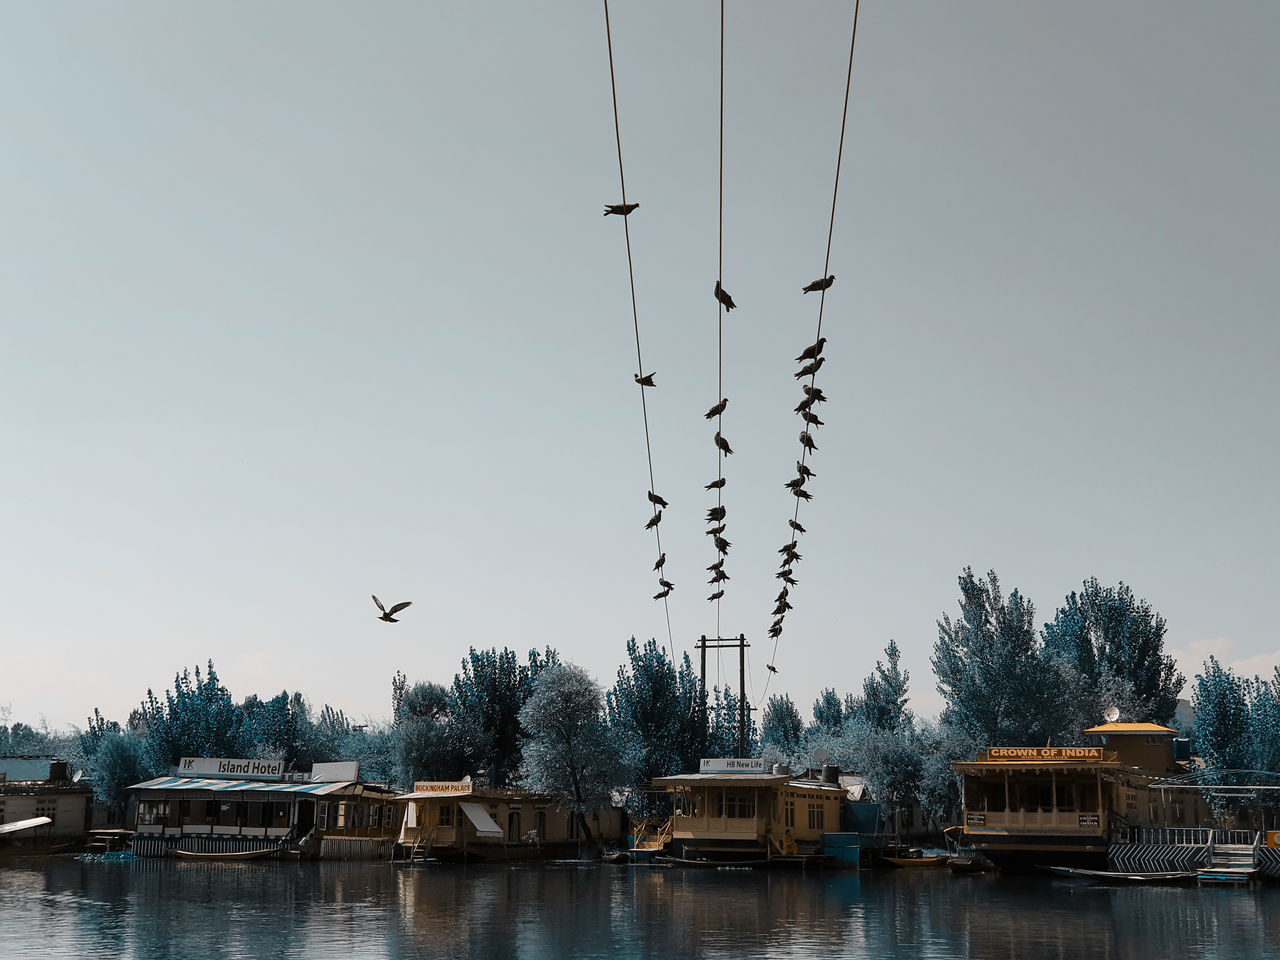 BIRDS FLYING ABOVE THE RIVER